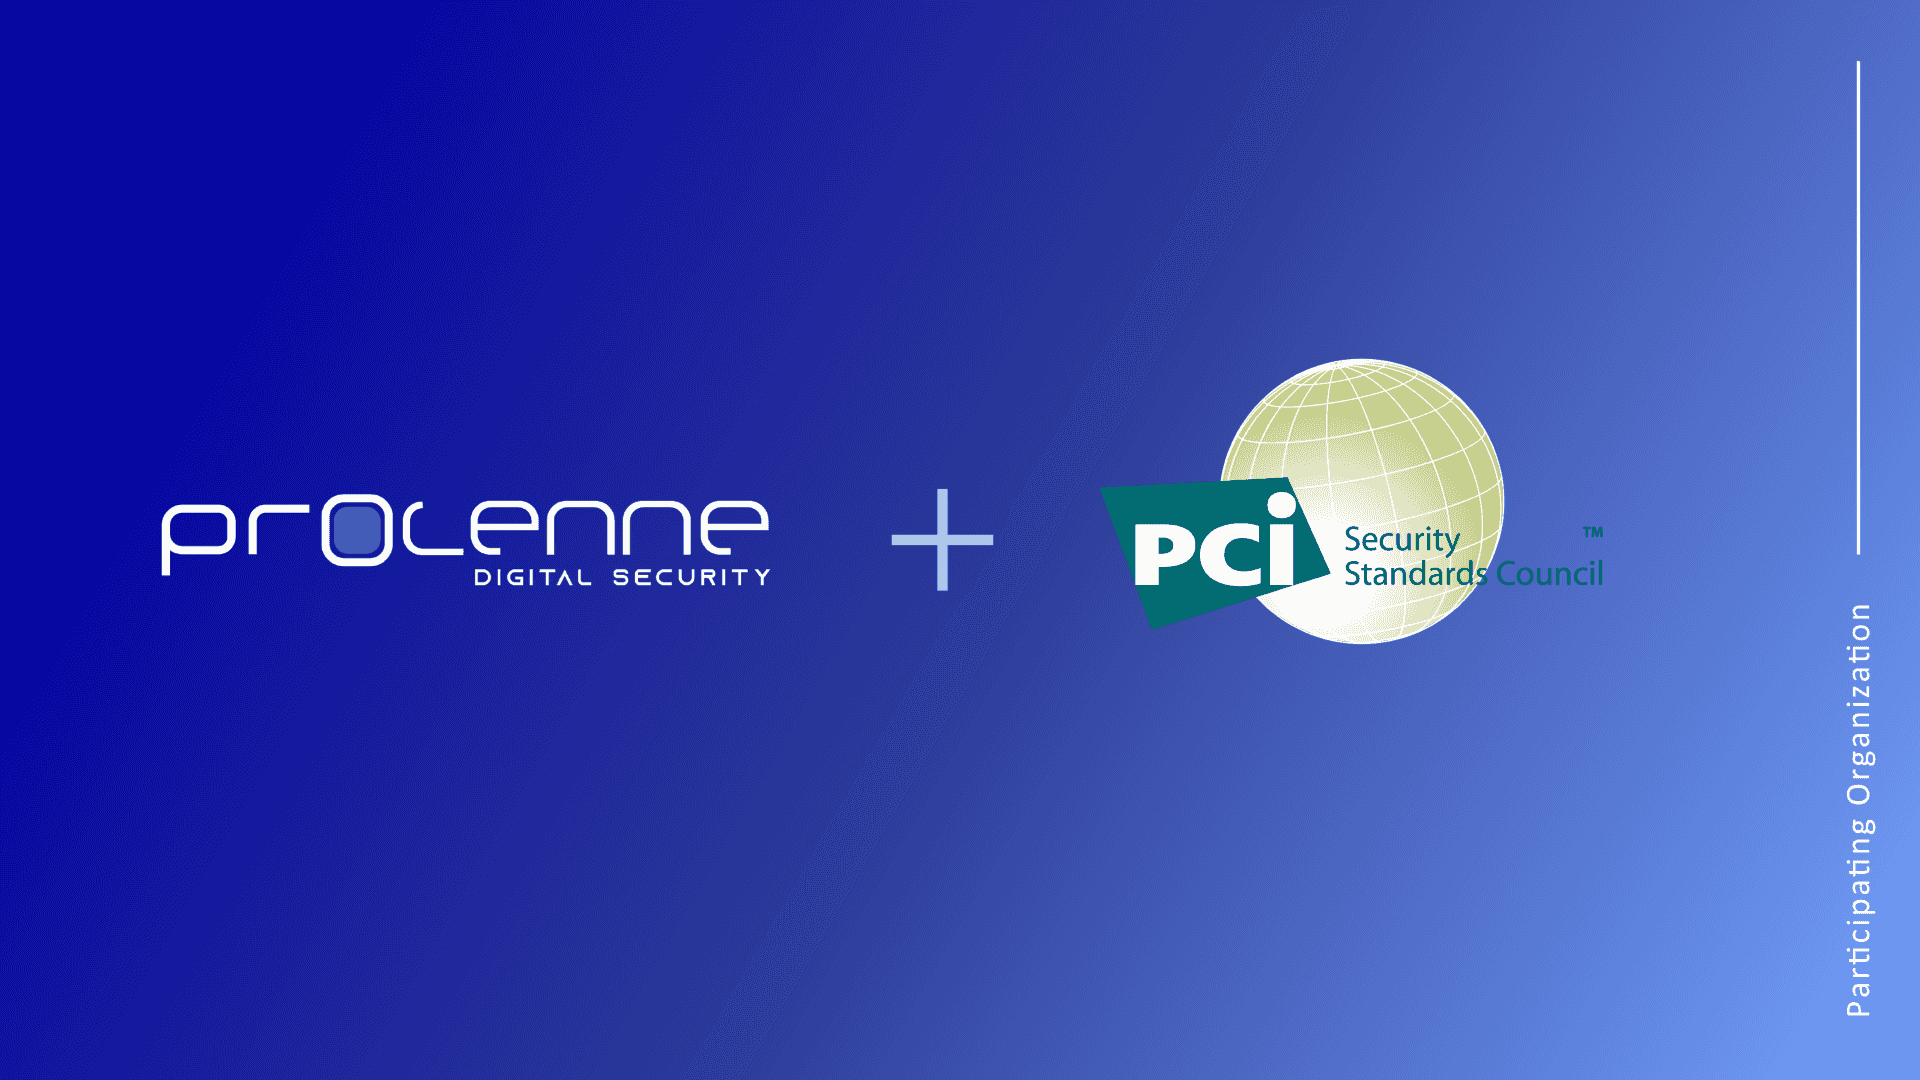 Procenne To Partner With PCI Security Standards Council To Help Secure Payment Data Worldwide